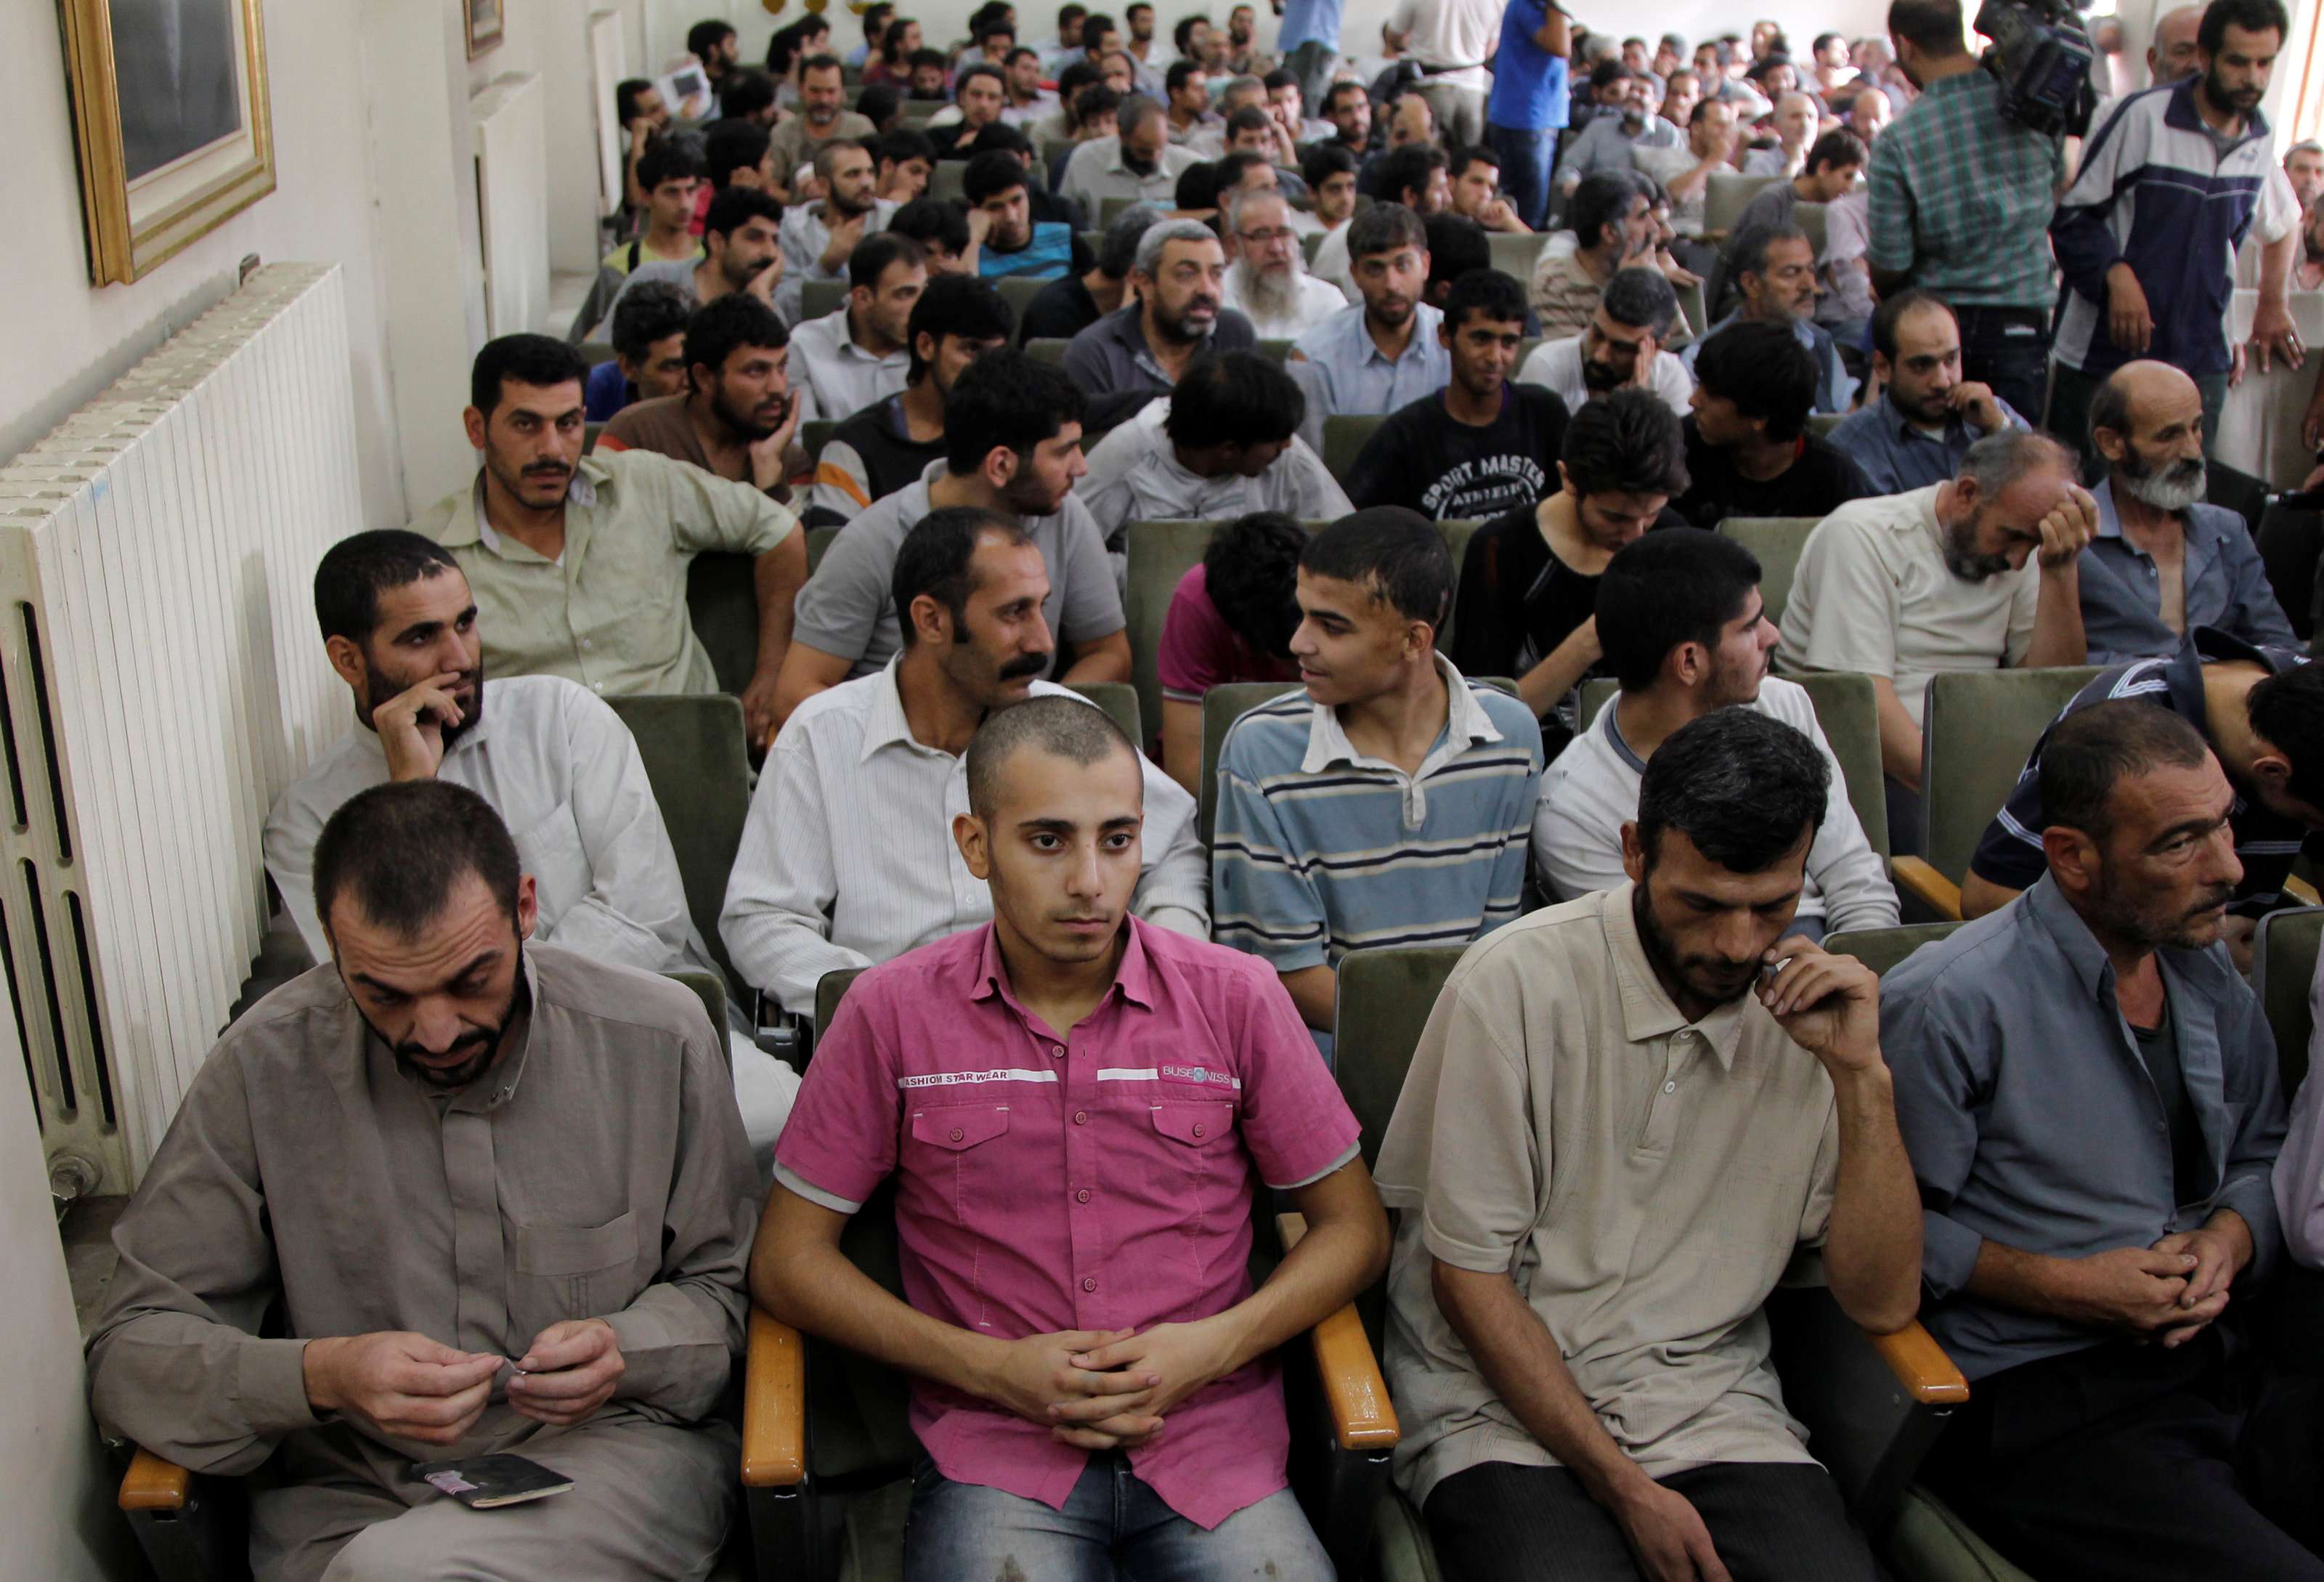 Syrian detainees, who were arrested over participation in protests against Syrian President Bashar al-Assad's regime, are seen waiting to sign their release papers at a police building in Damascus October 24, 2012. 